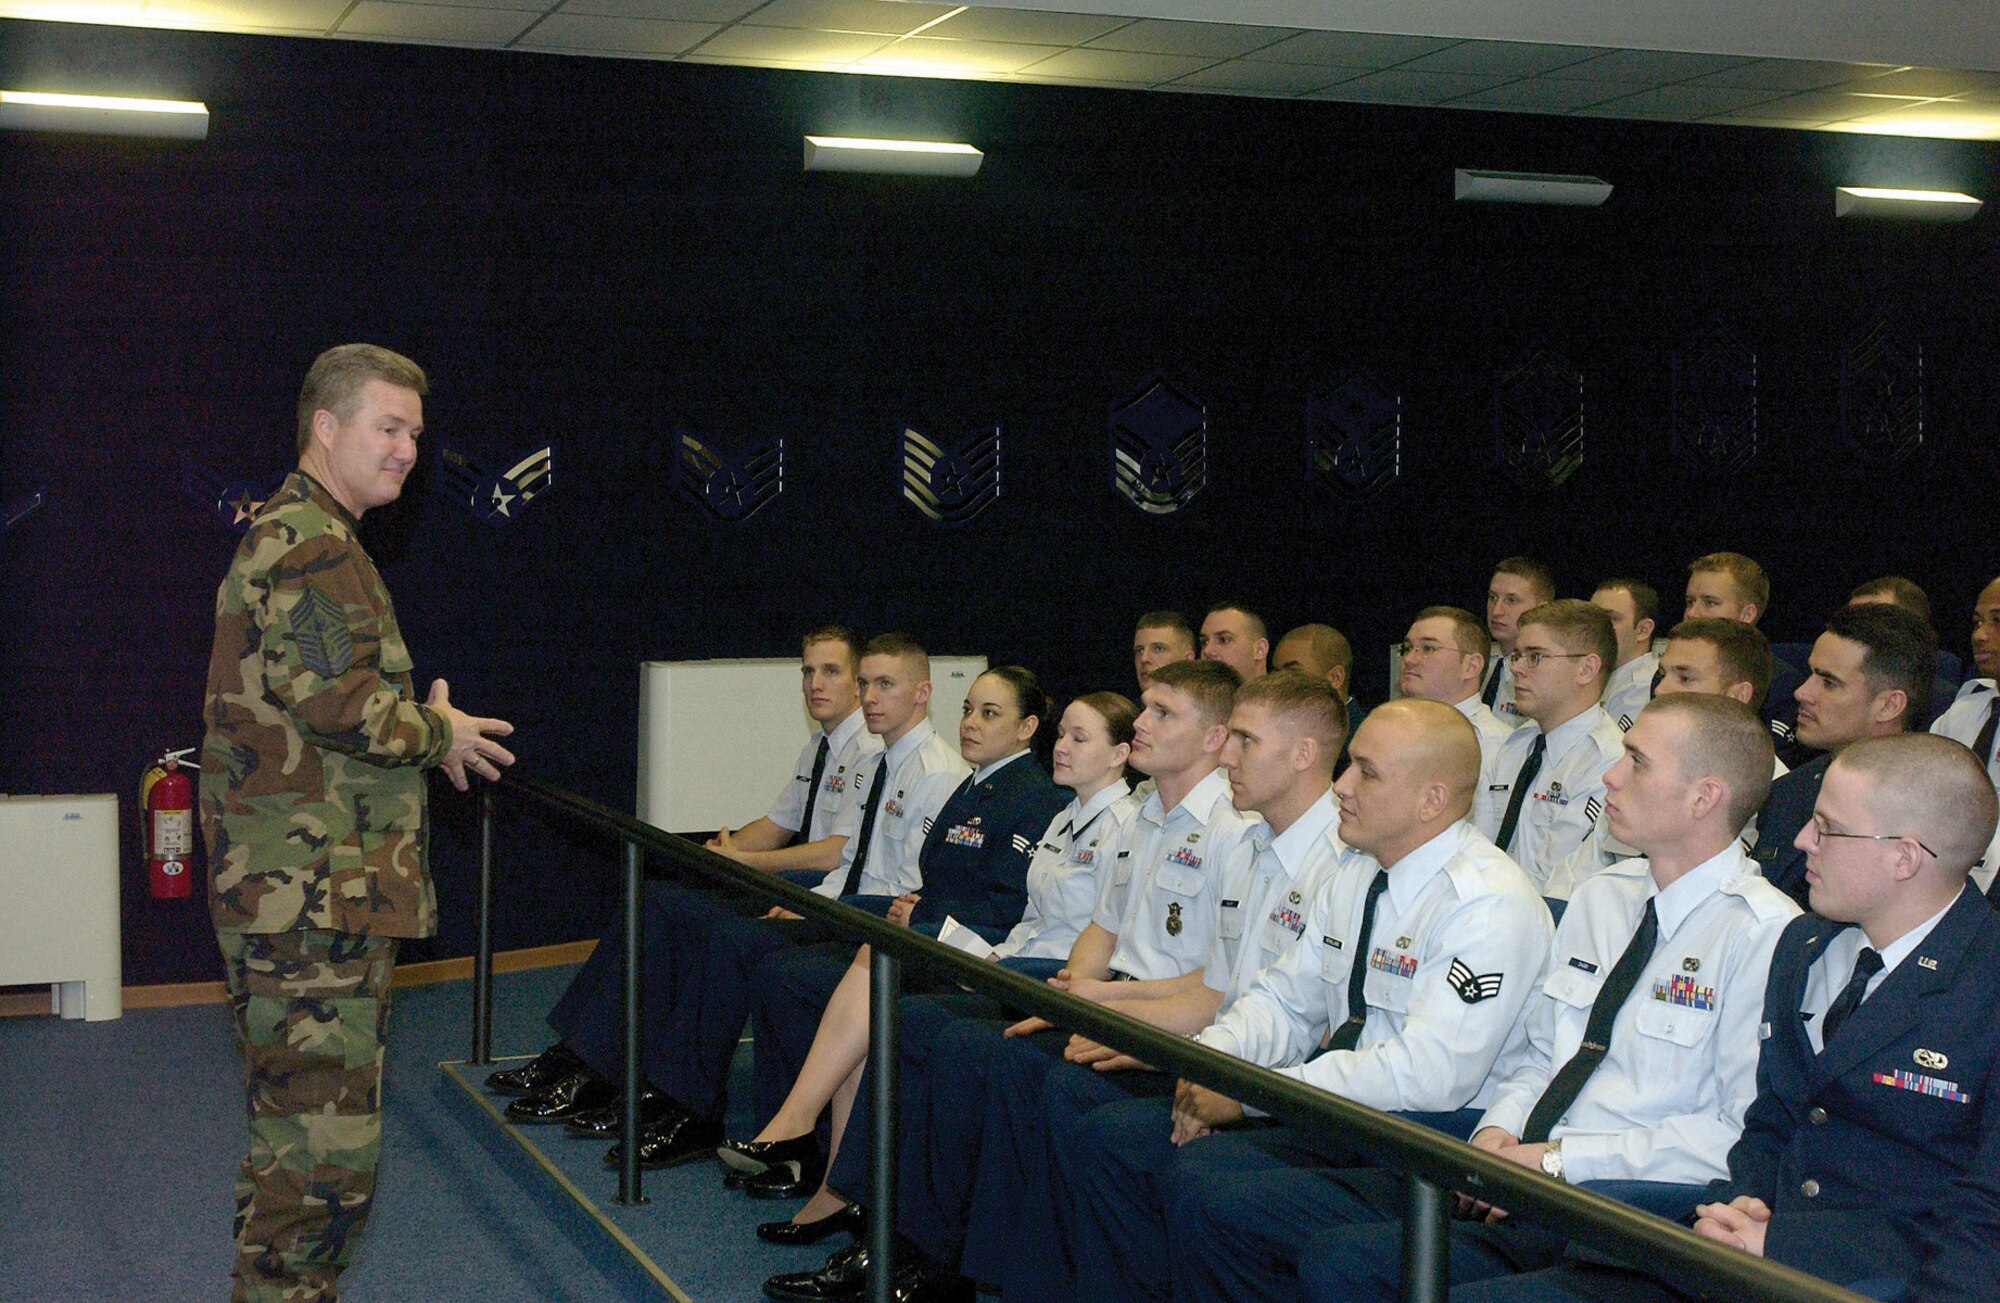 Chief Master Sgt. of the Air Force Gerald Murray talks to Airmen at the Airman Leadership School during his visit to Aviano Monday. Chief Murray held several briefings that discussed the future of the Air Force and he also thanked Airmen for their service.  Photo by Airman Liliana Moreno  